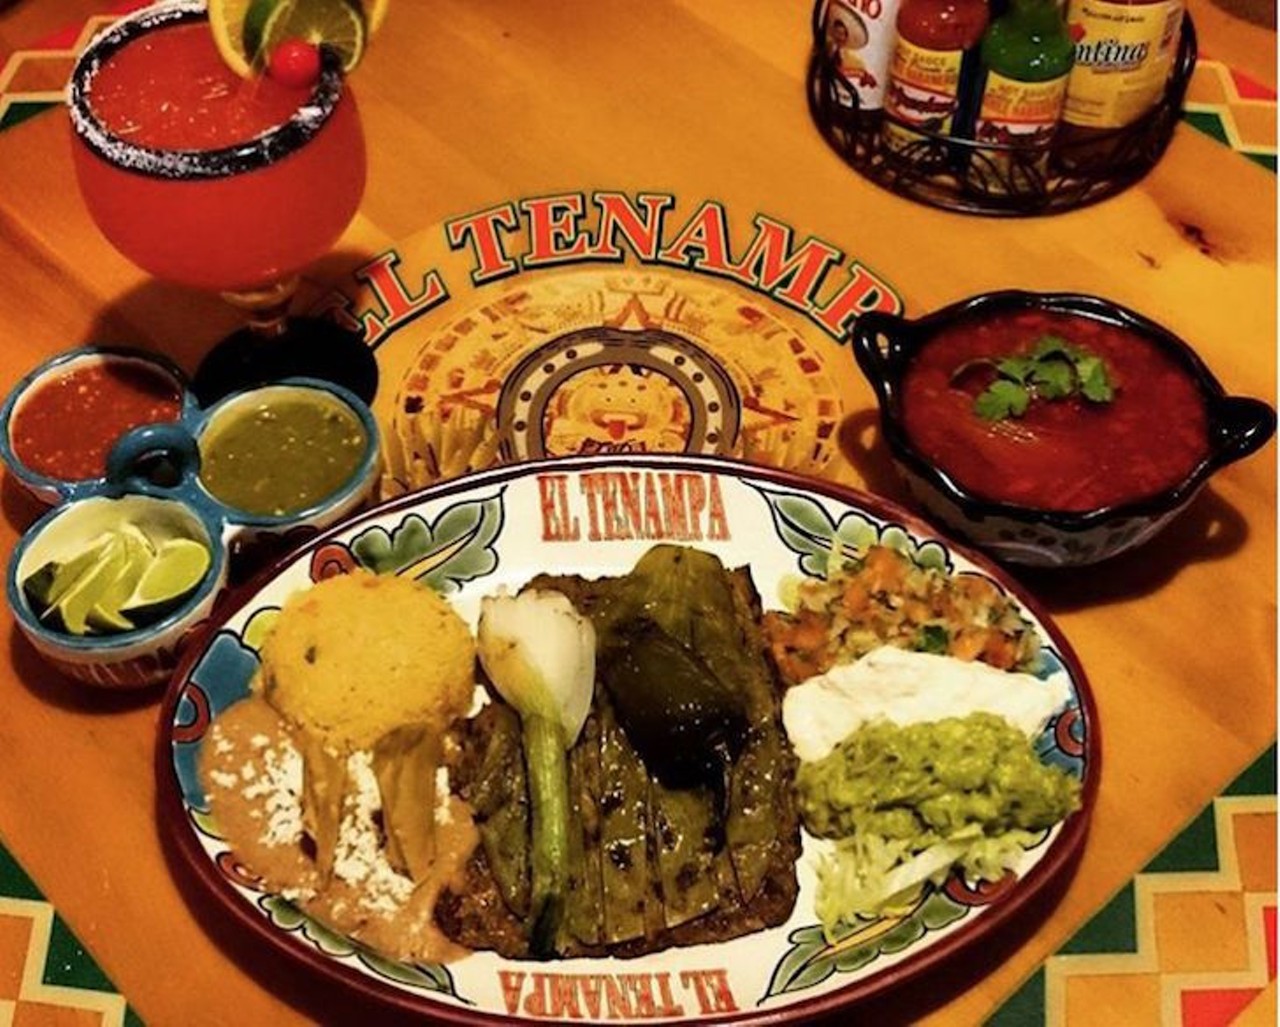 El Tenampa Mexican Restaurant
4565 W. Irlo Bronson Memorial Highway, Kissimmee, 407-397-1981
It&#146;s a little bit of a drive, but El Tenampa is worth it. The Kissimmee joint boasts an extensive menu with filling offerings, including vegetarian fare. Stop in on the weekend and you can even enjoy a live performance from a mariachi band. Not to mention, their $1.99 tacos are out of this world.
Photo via marcos2184/Instagram